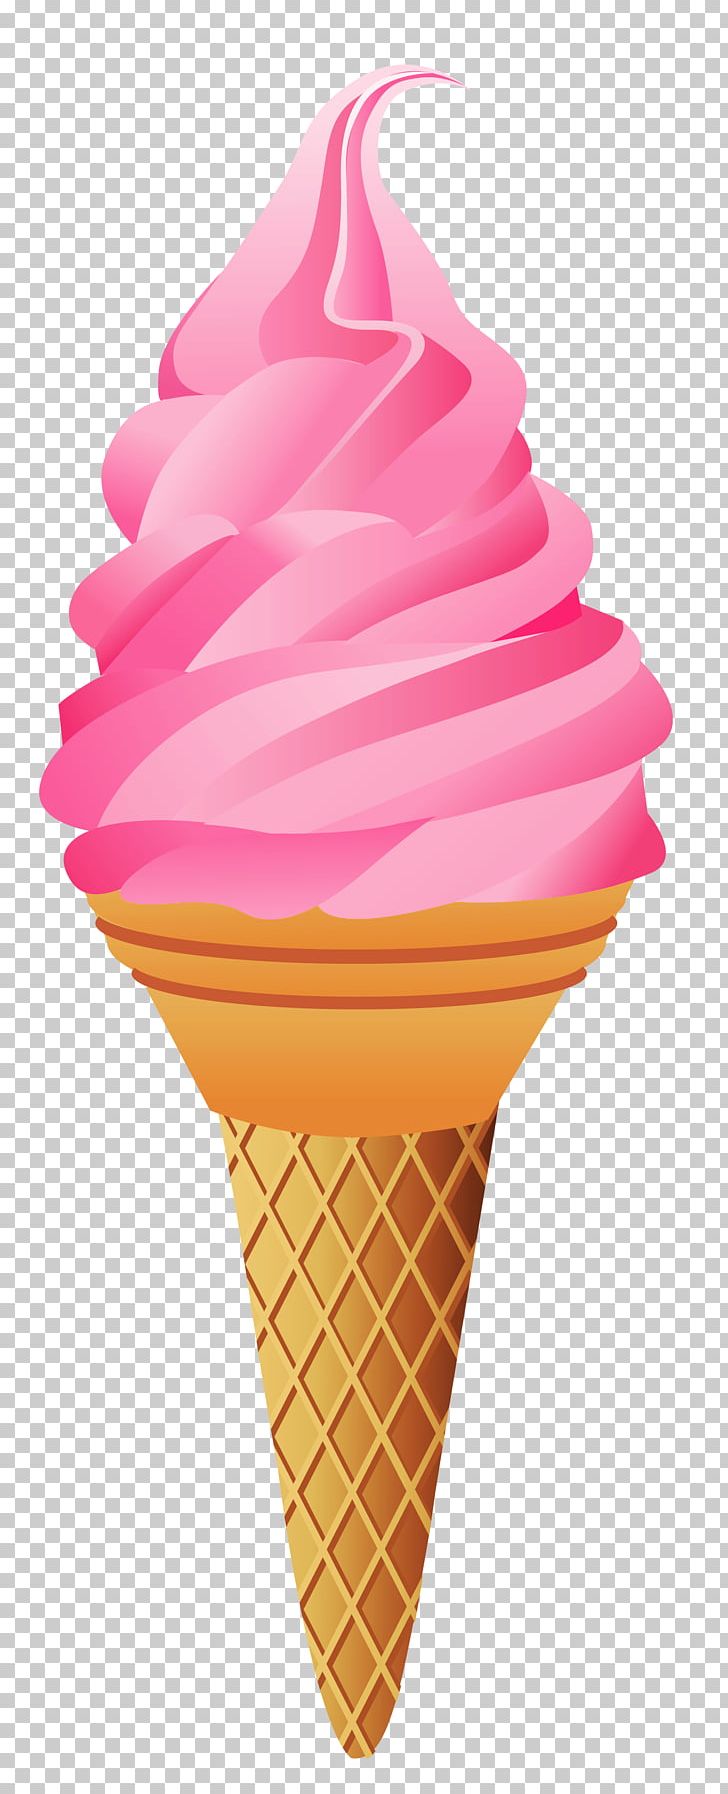 Ice Cream Cone Strawberry Ice Cream PNG, Clipart, Clip Art, Cream, Dairy Product, Dessert, Dondurma Free PNG Download